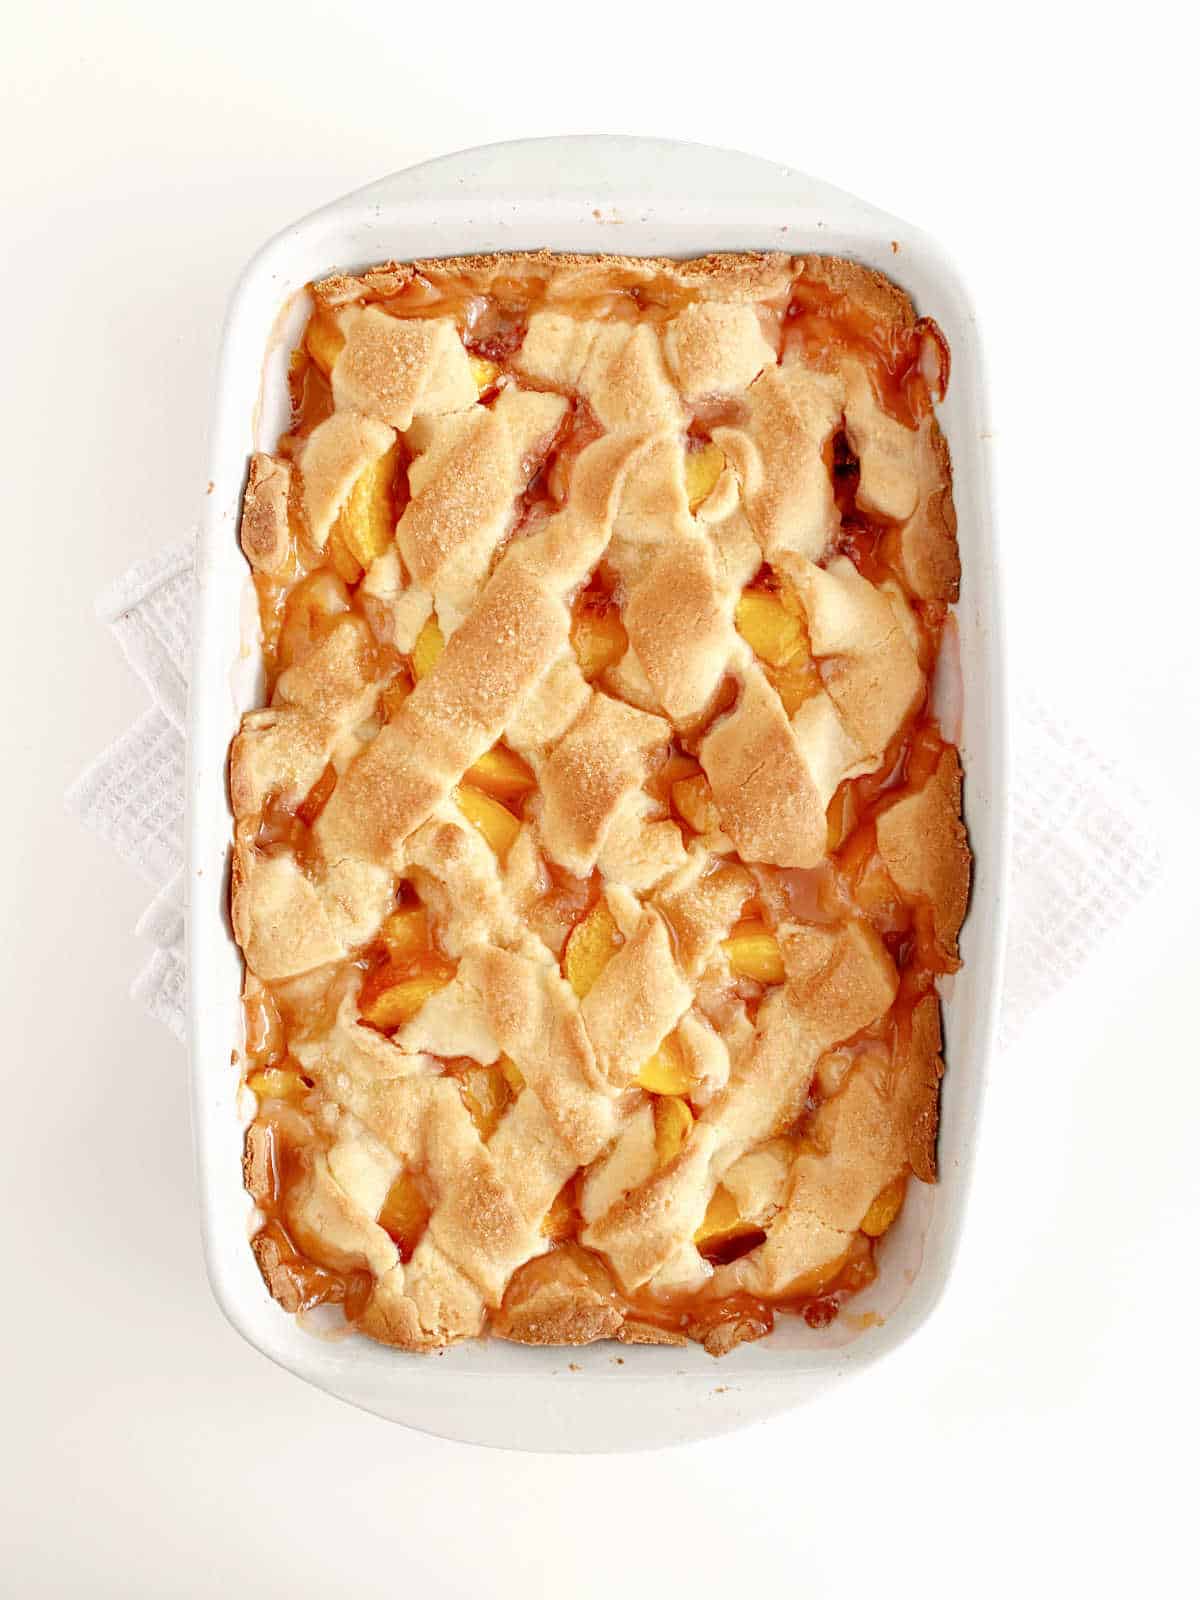 Baked peach cobbler with pie crust lattice in a white ceramic rectangular dish on a white surface.